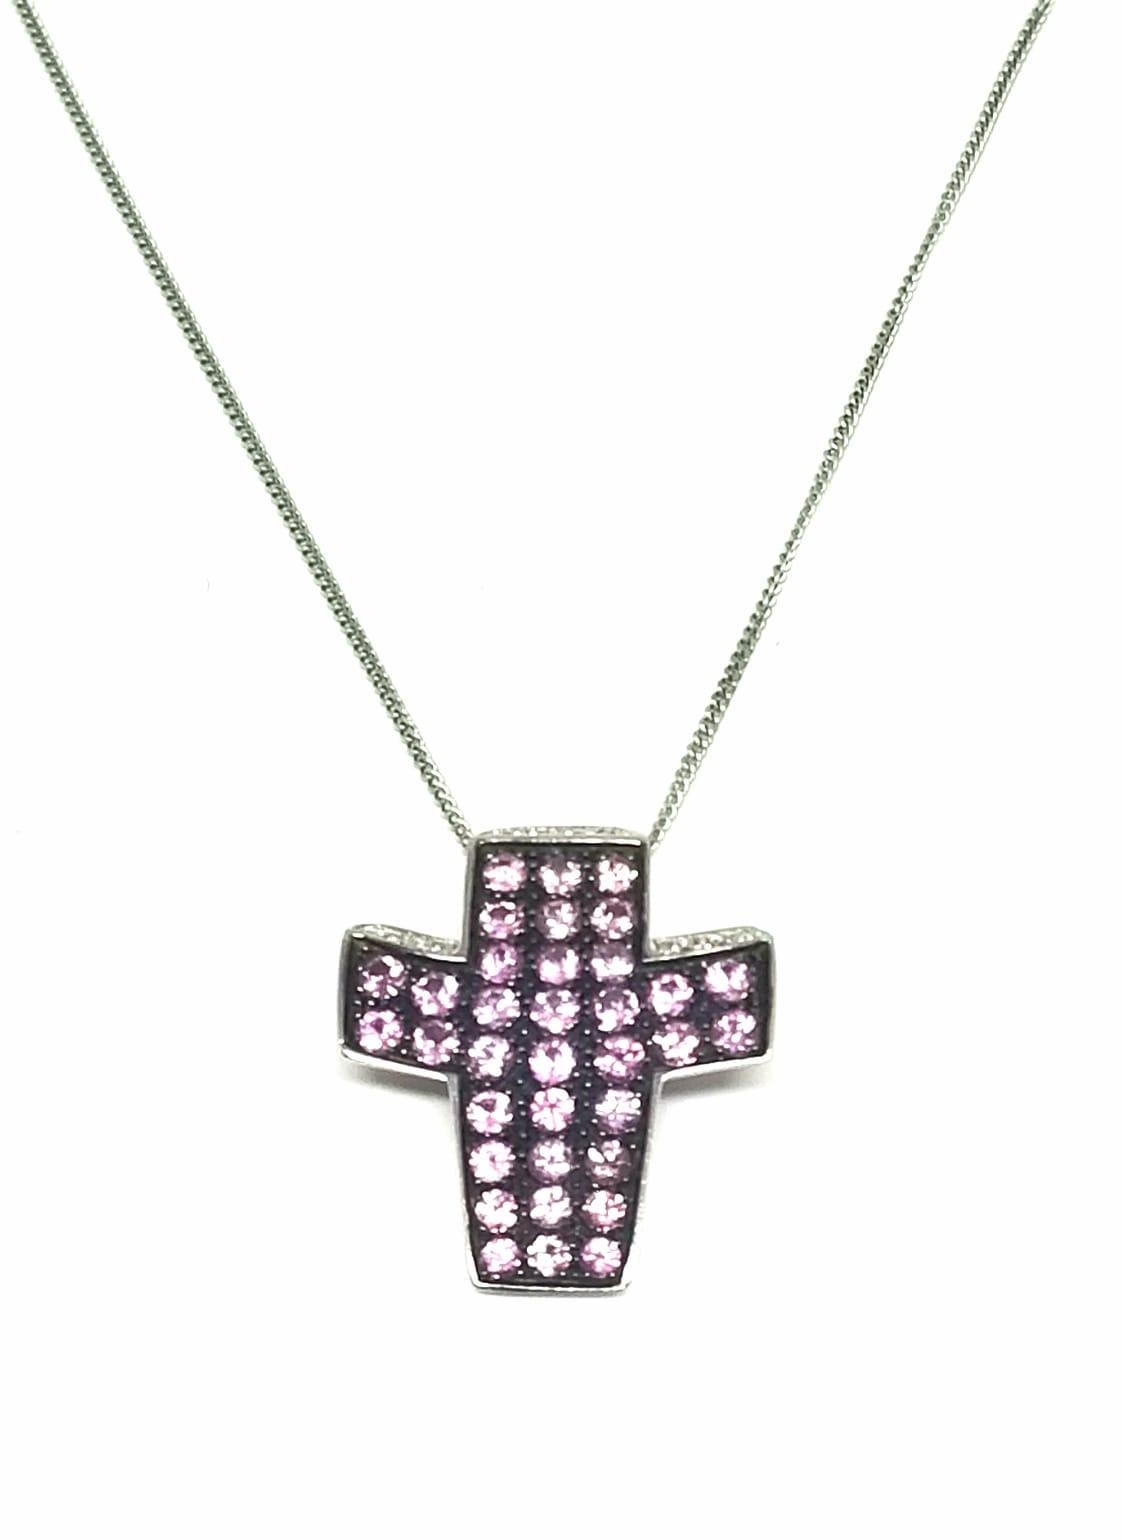 Andreoli Diamond Pink Sapphire 18 Karat Gold Cross Pendant Necklace

This necklace features:
- 0.14 Carat Diamond
- 2.79 Carat Pink Sapphire
- 10.30 Gram 18K White Gold
- Made In Italy